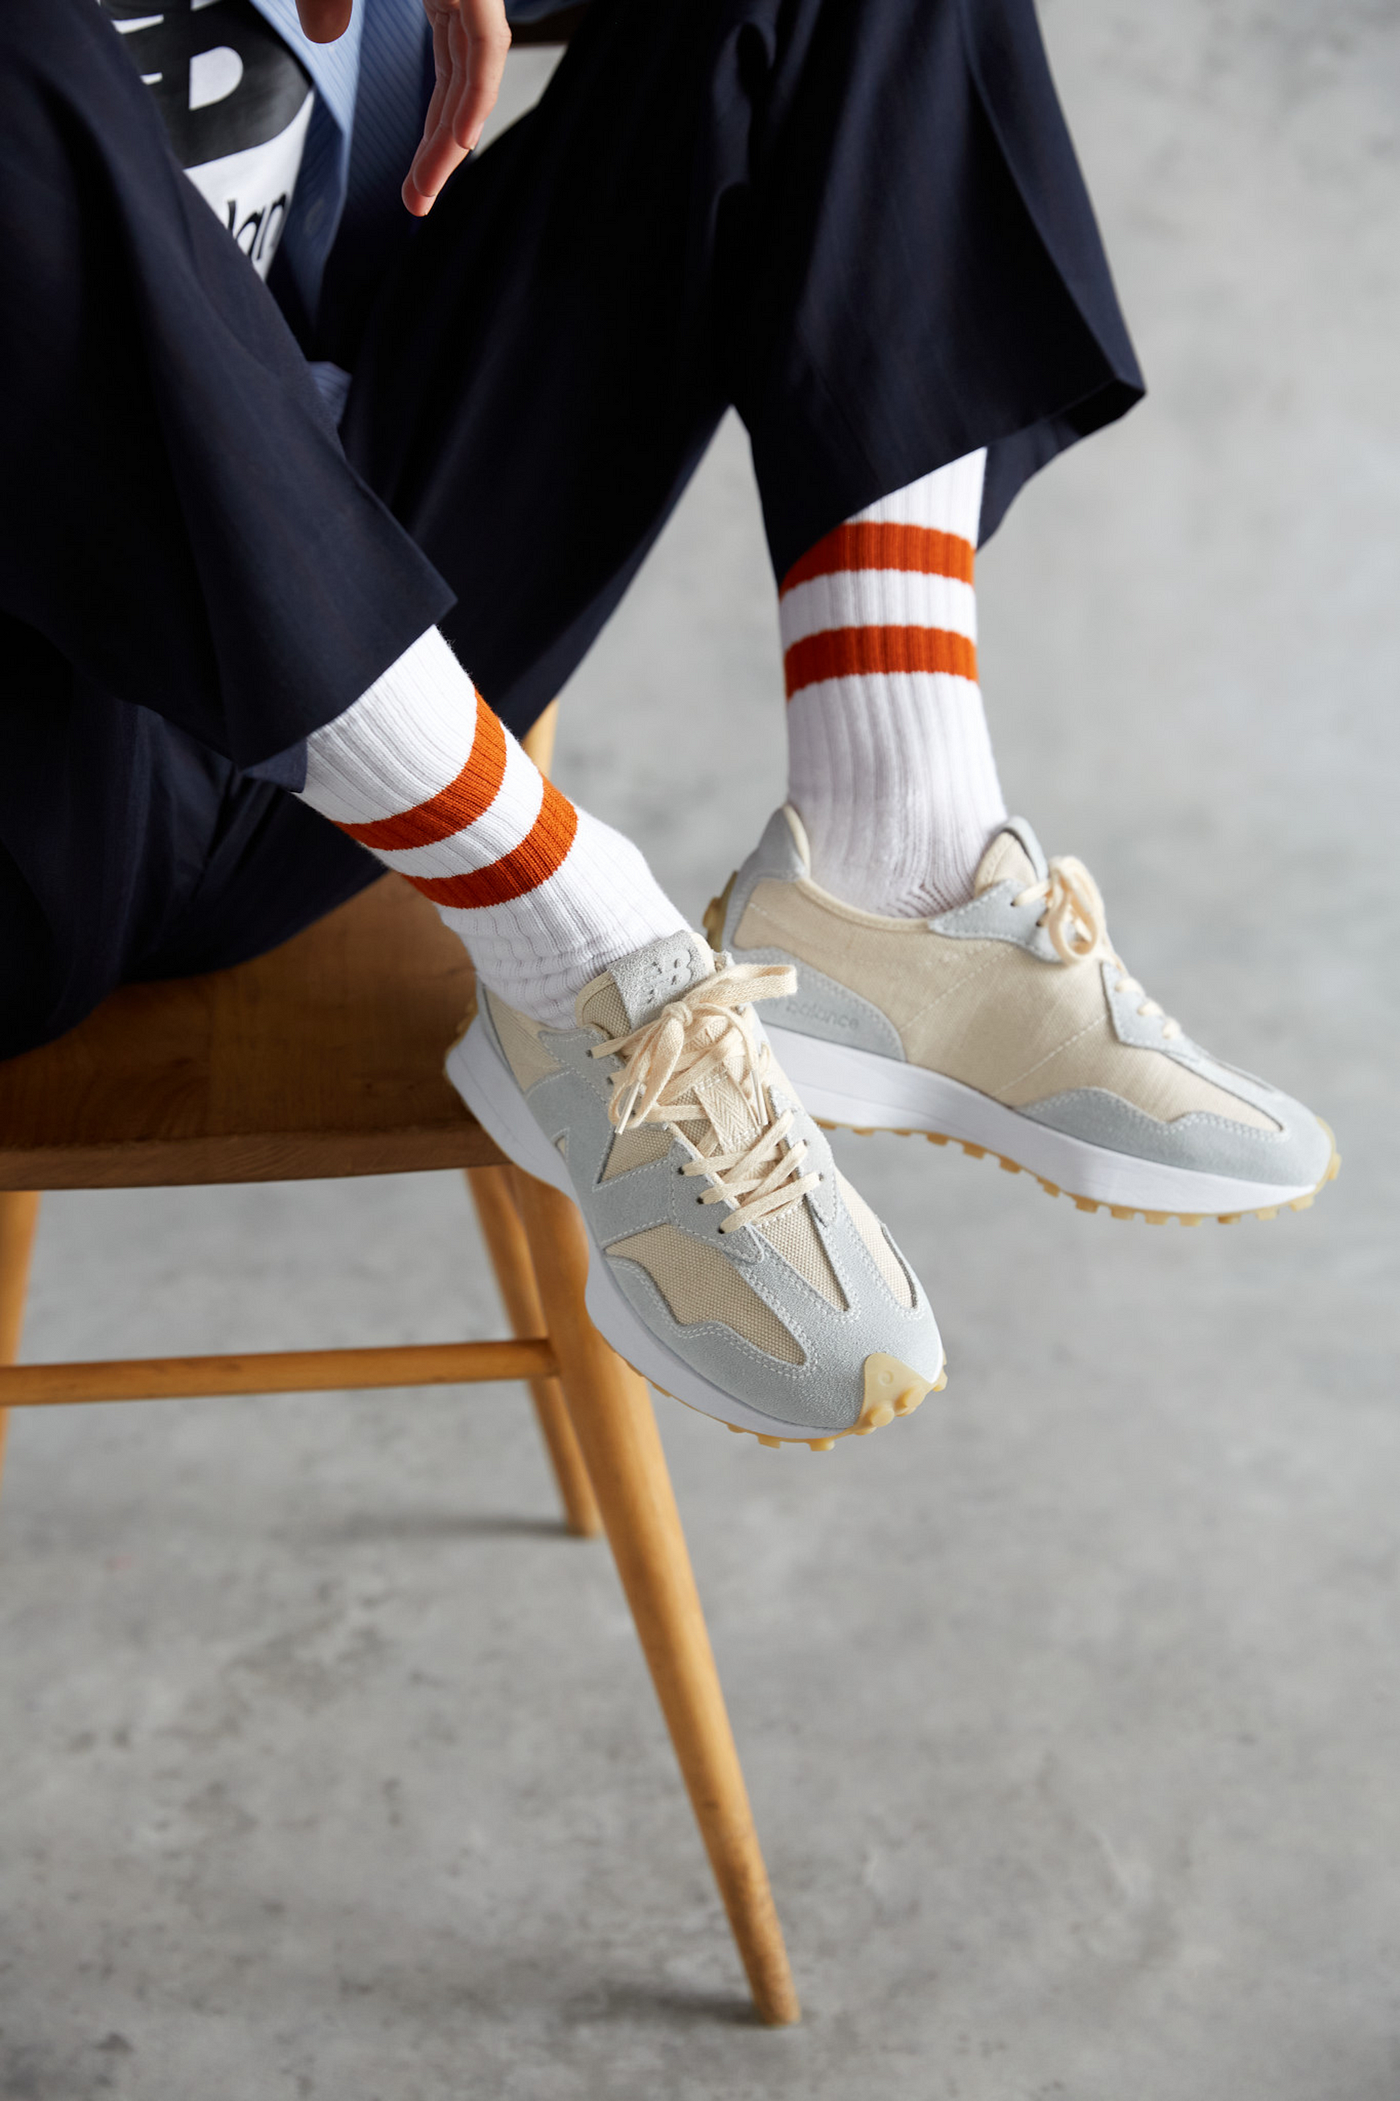 Chris Davis, Chief Marketing Officer New Balance, on forming authentic partnerships, calculated risk-taking, and making dad shoes cool. by Carolyn Hadlock | The Thinkers Project Medium